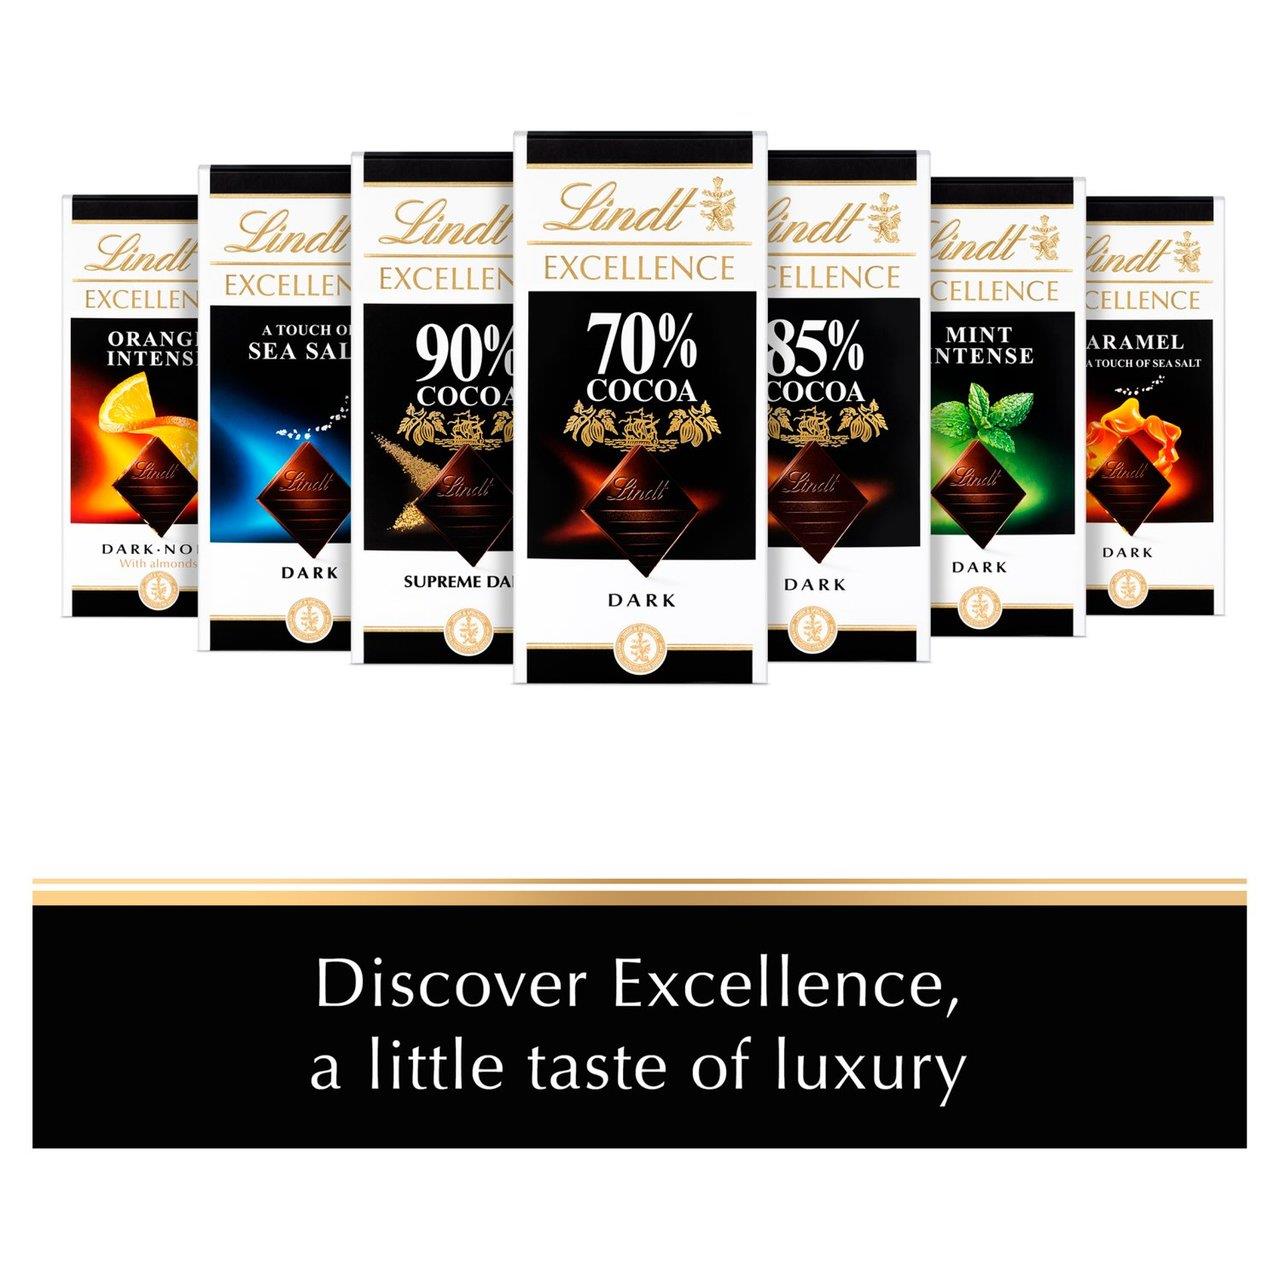 Lindt Excellence 70% Cocoa Chocolate 100g